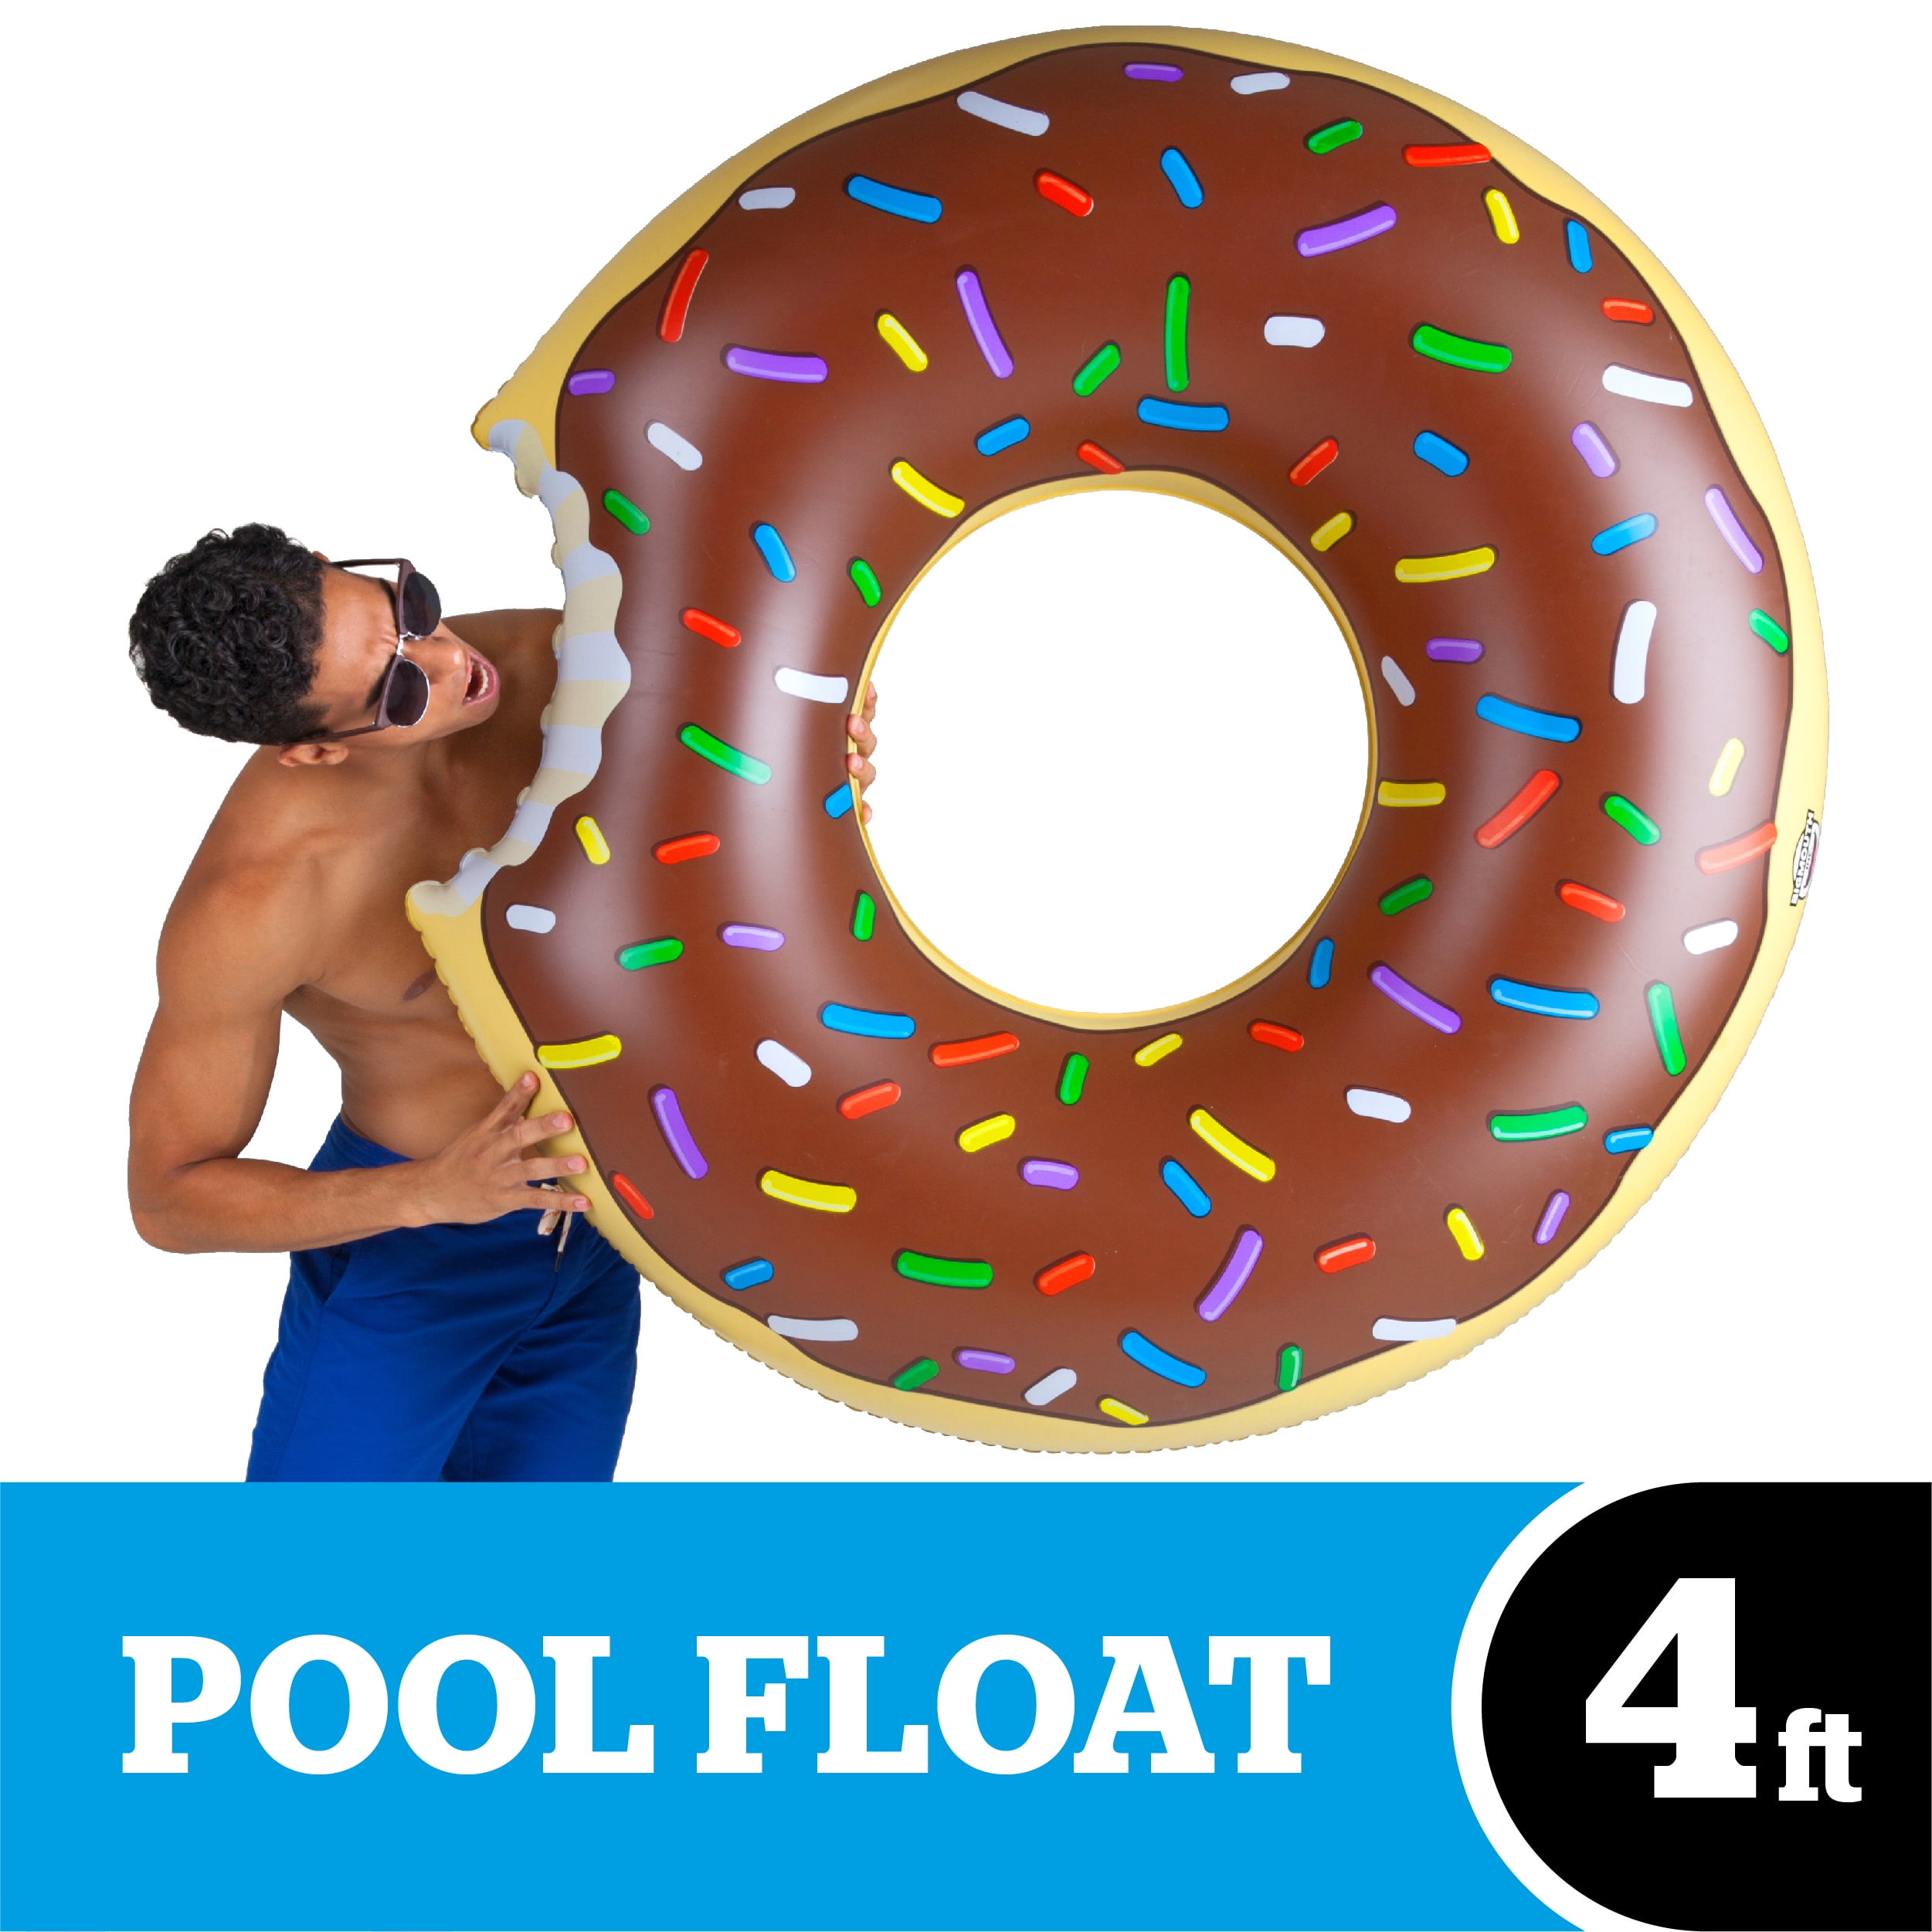 Giant Pizza Slice Pools Swimming Pool Float Inflatable 6ft Long F2 for sale online 